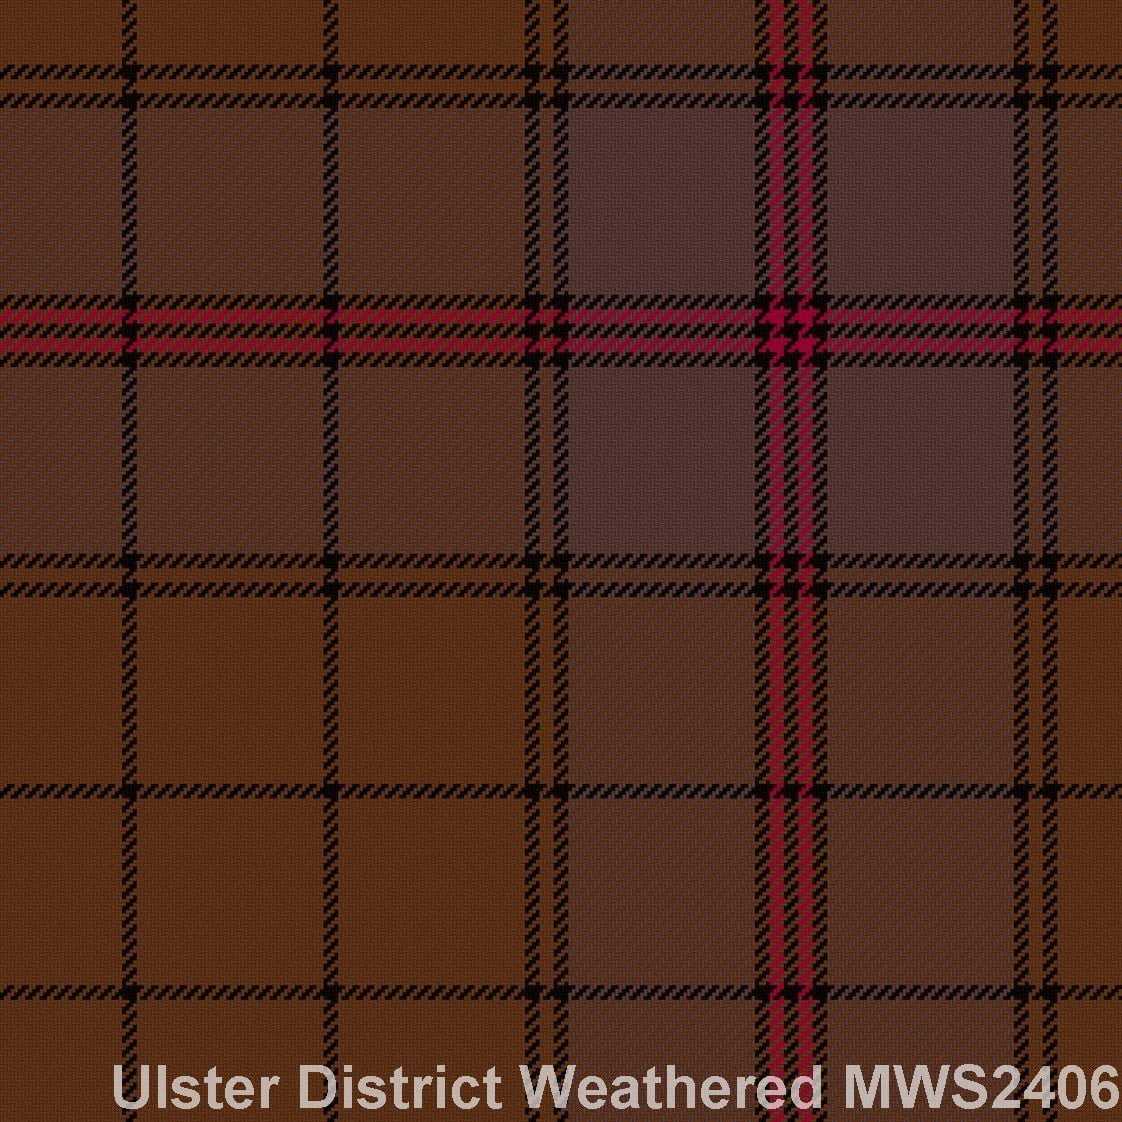 Ulster District Weathered